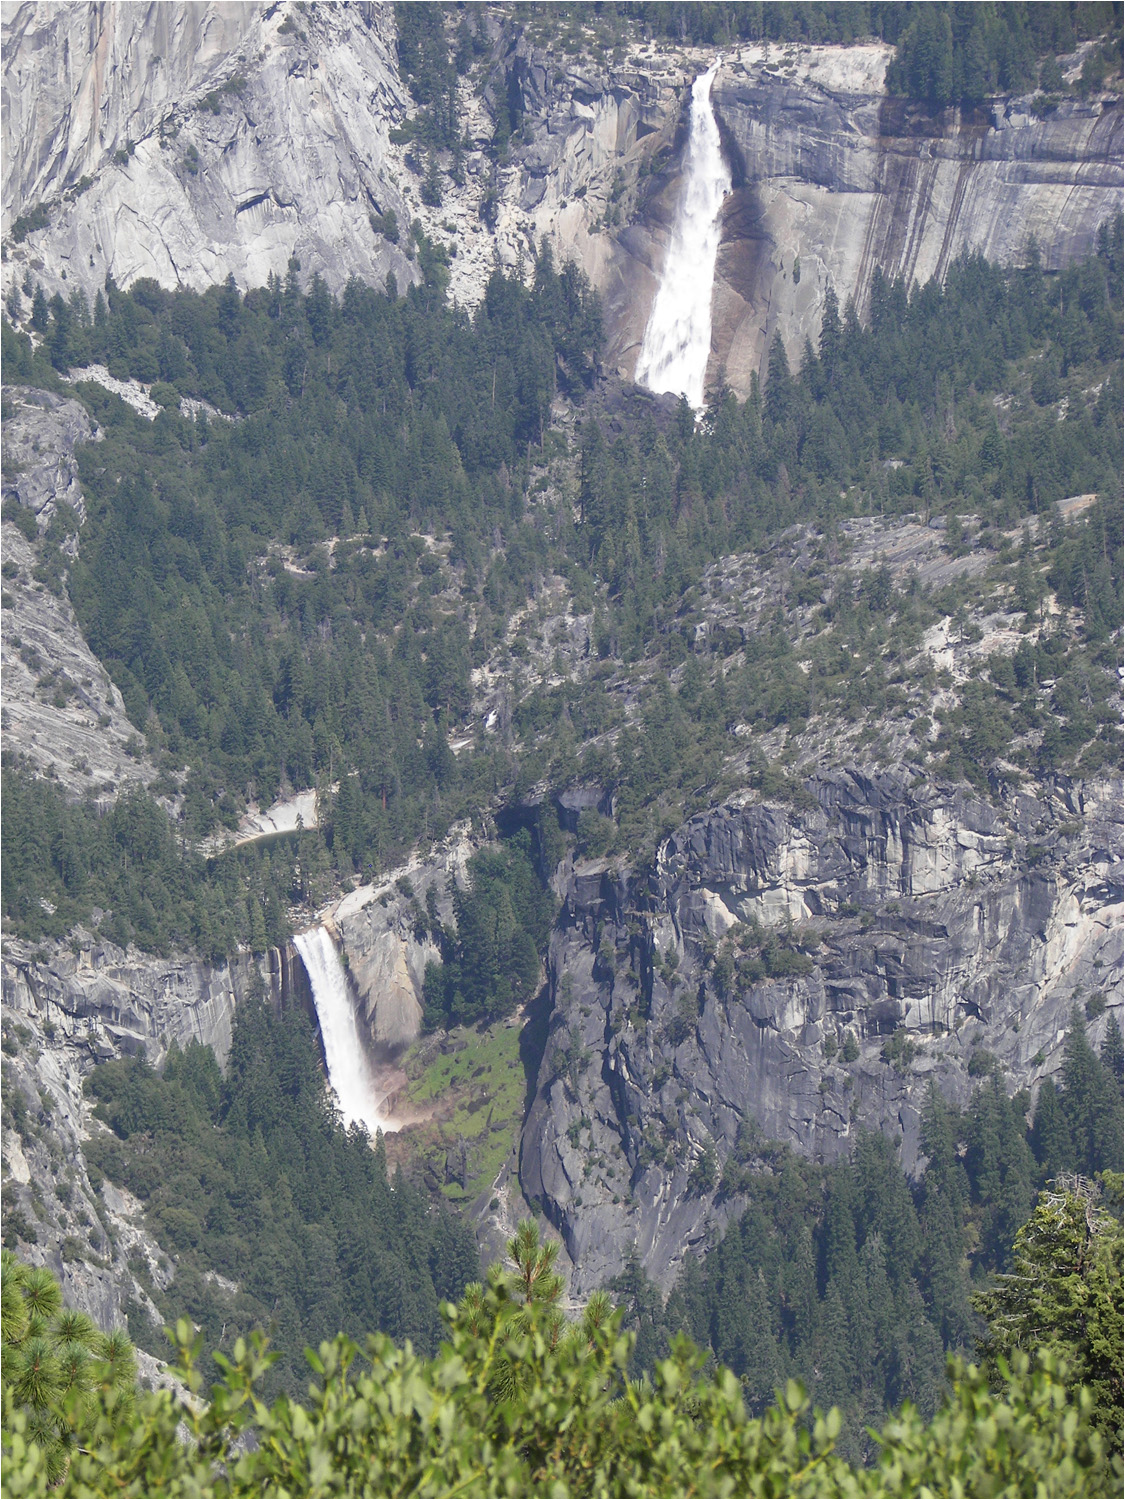 Glacier Point Hike-L-R, Vernal and Nevada Falls